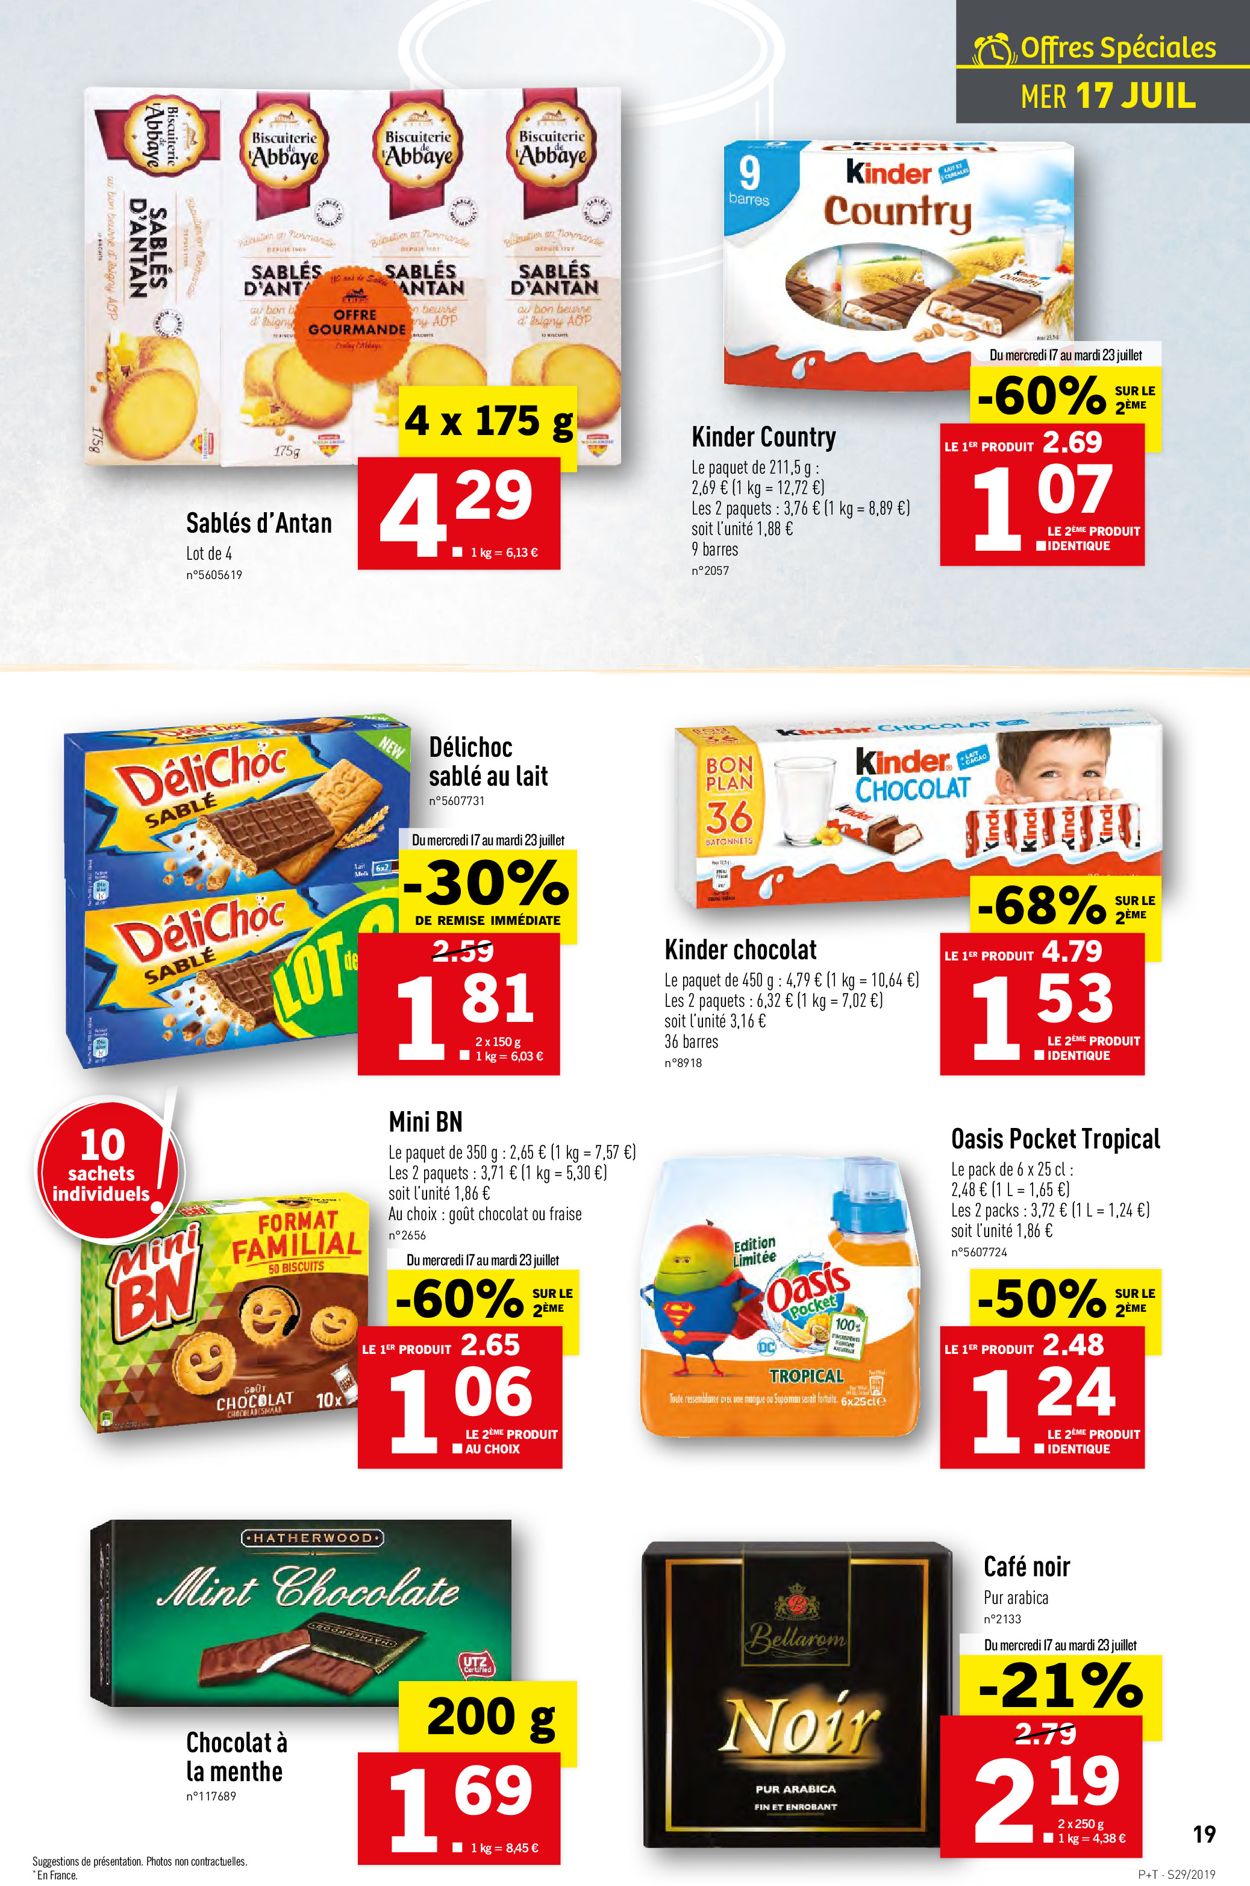 Lidl Catalogue - 17.07-23.07.2019 (Page 19)